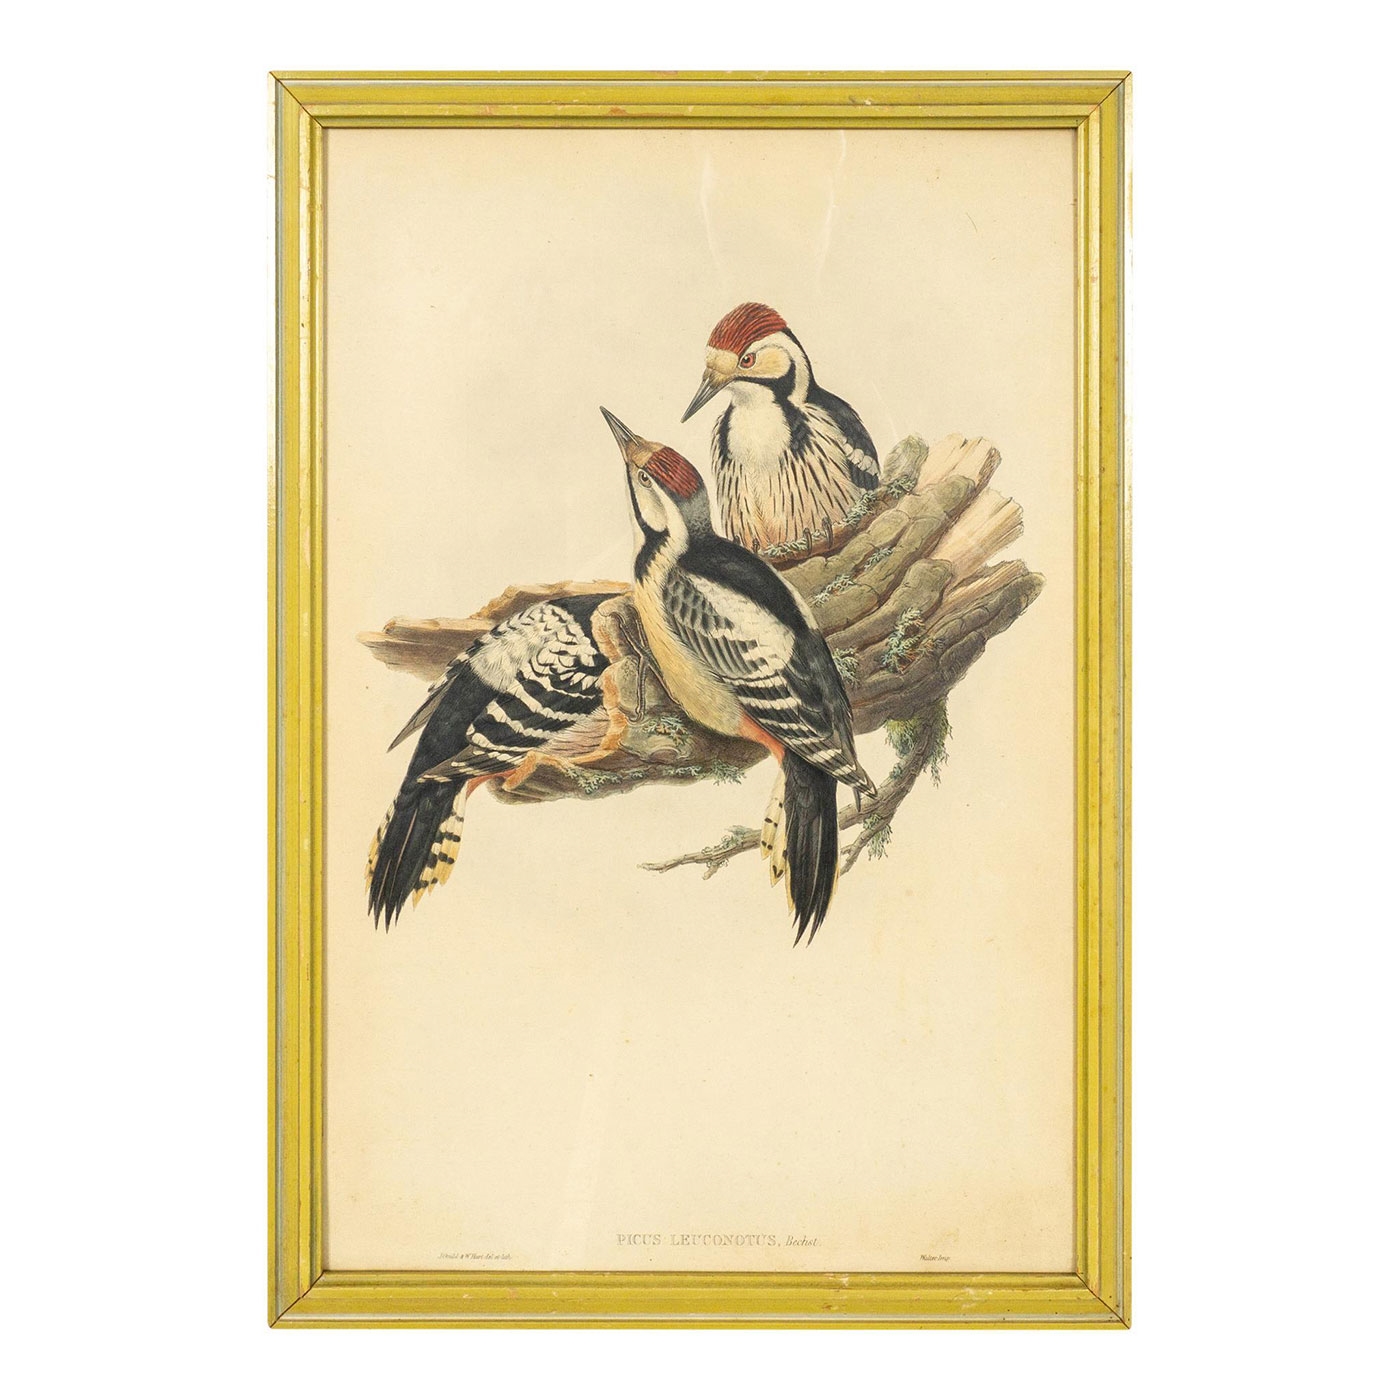 Picus Leuconotus (White-backed Woodpecker) from Bird of Great Britain series by John Gould